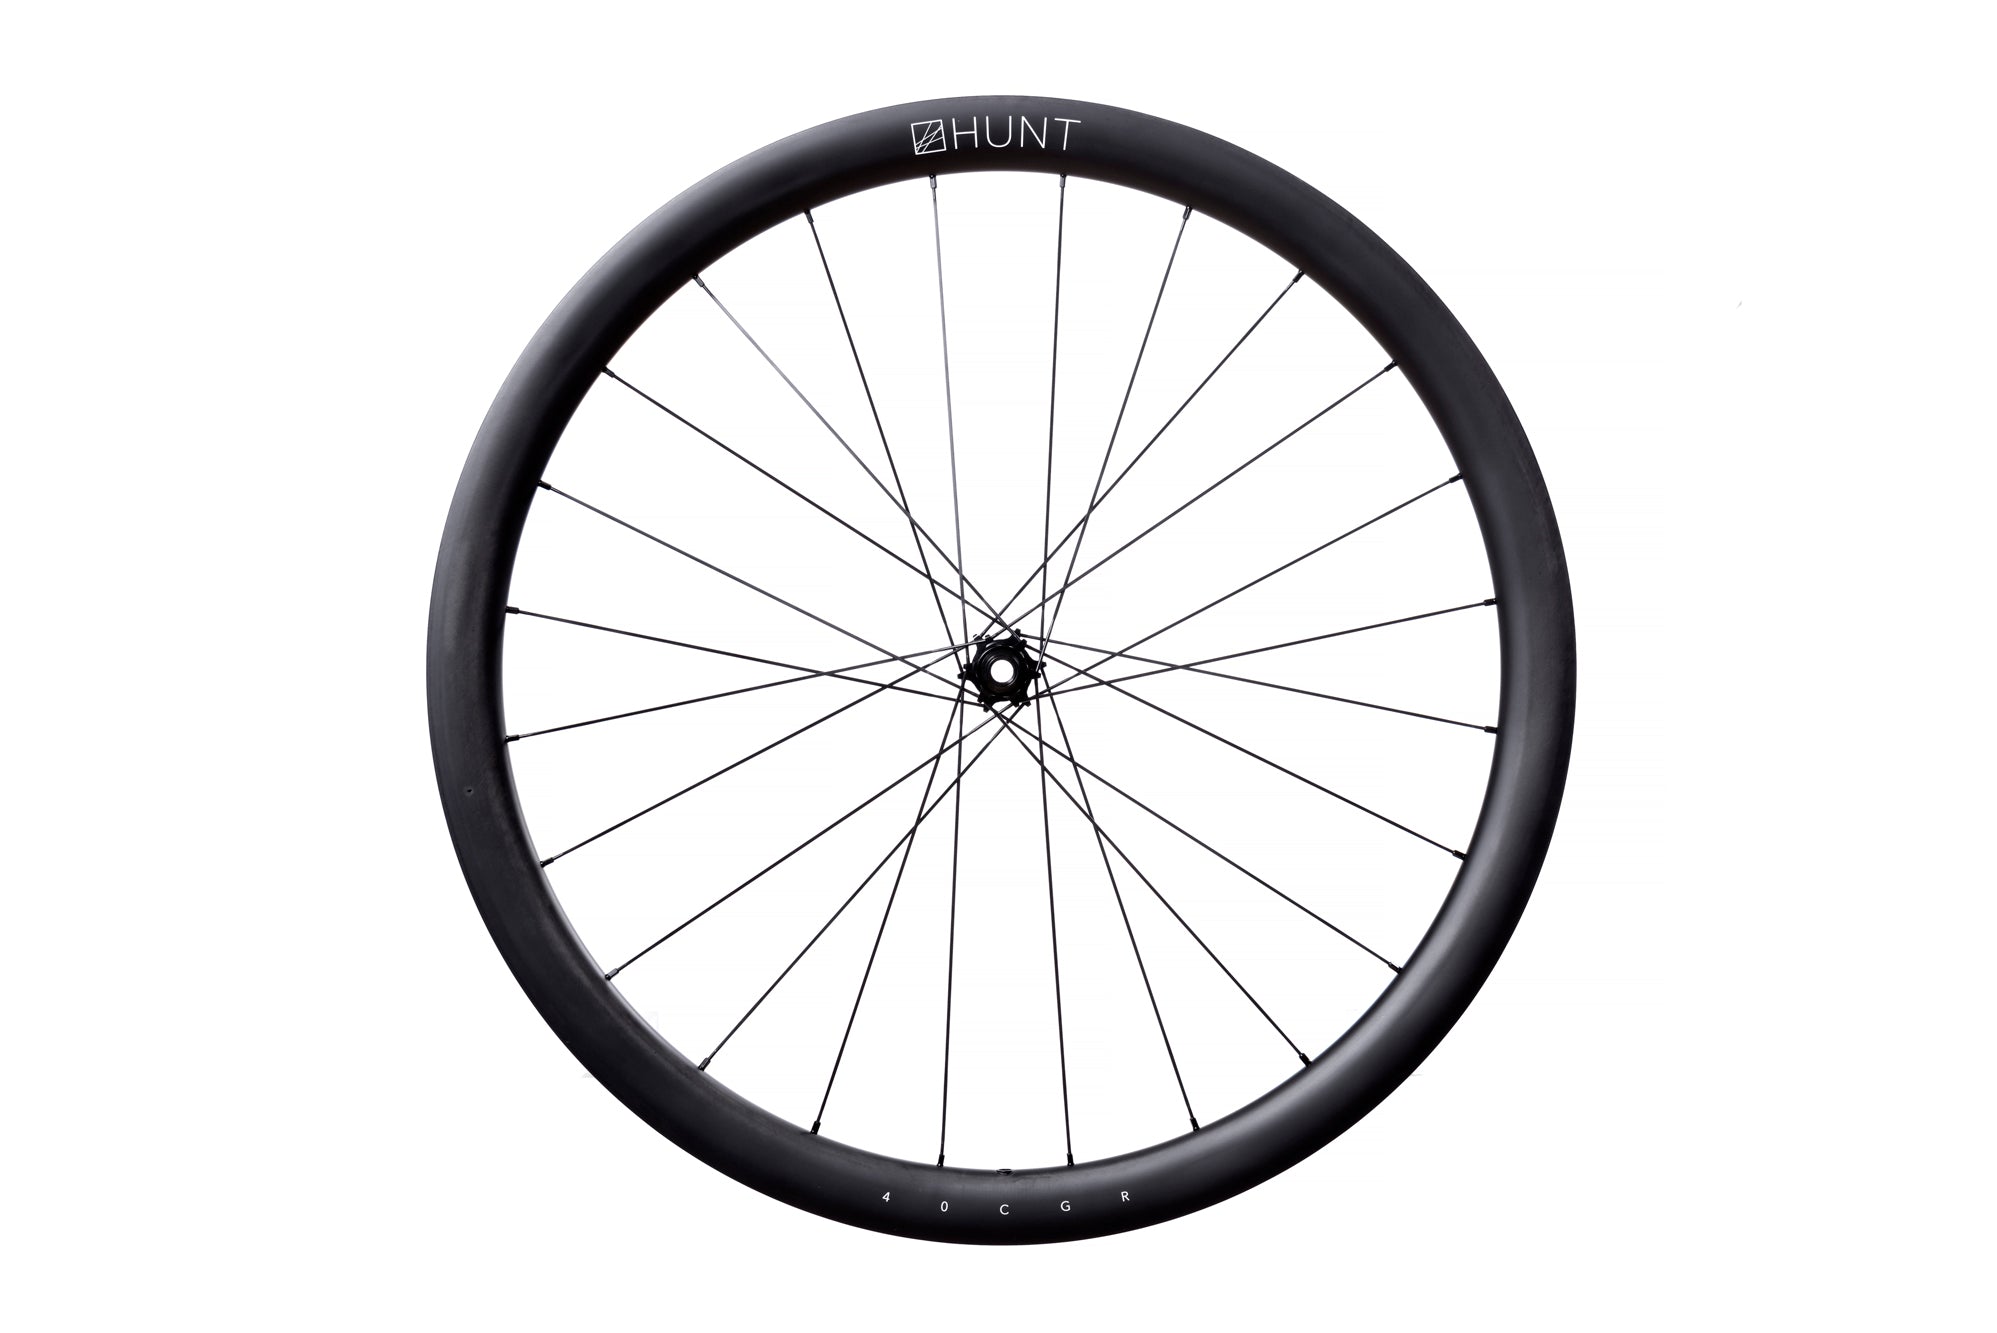 <h1>RIM PROFILE</h1><i>A strong and super-lightweight hookless rim. The rim dimensions are 40mm deep and 30mm wide external (25mm internal) optimised for 38-40mm tires. Tubeless for lower weight, rolling resistance, and better puncture protection.</i>